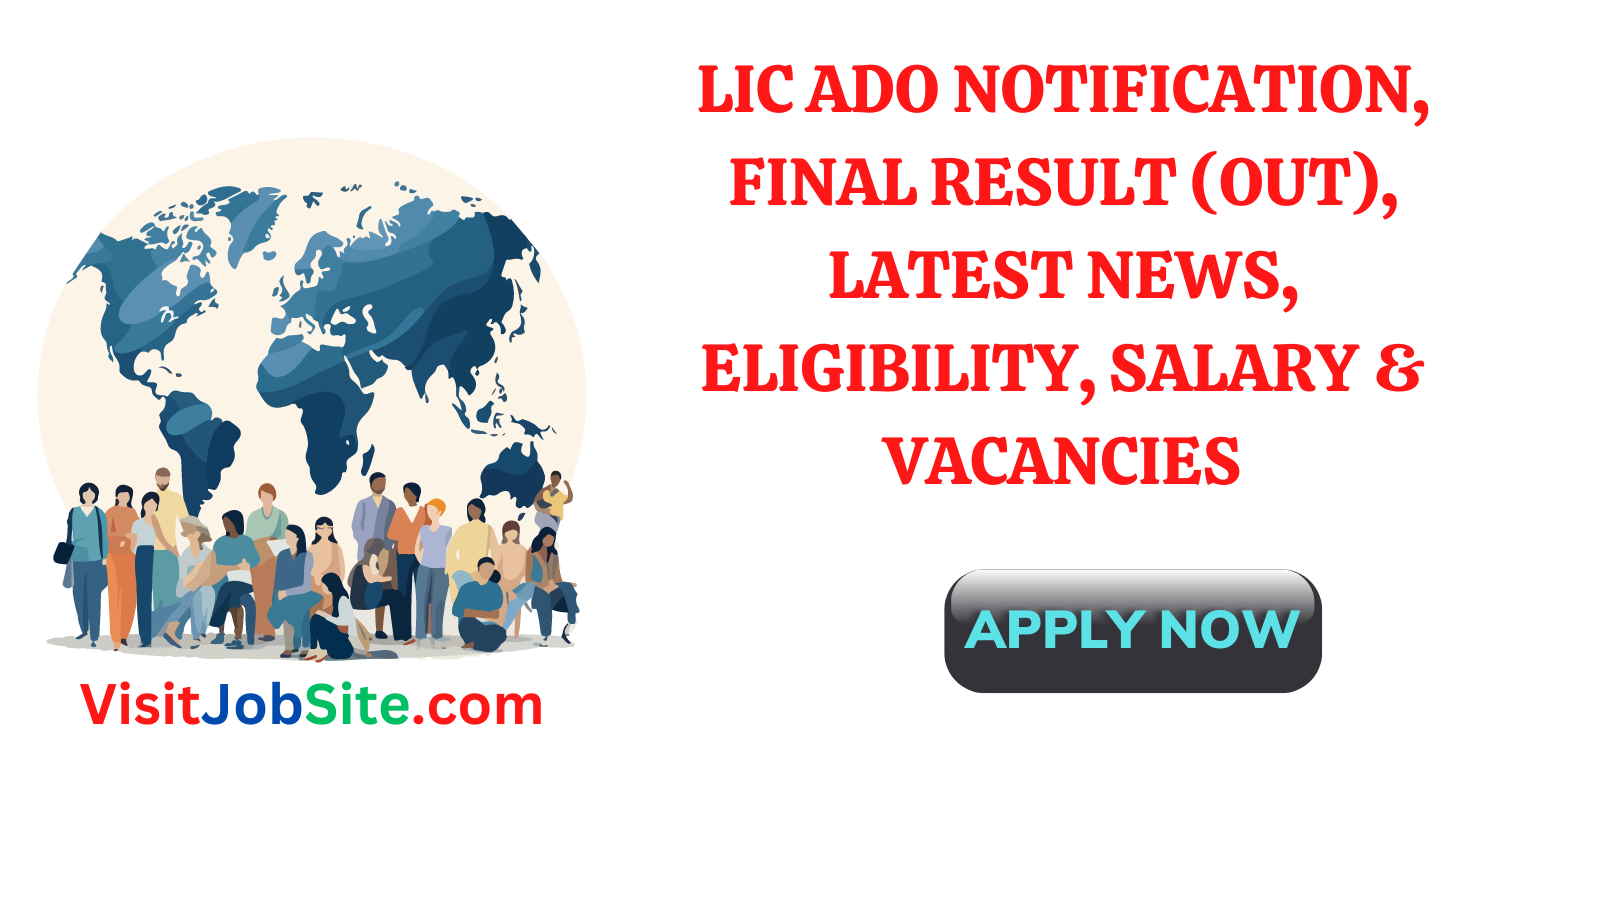 LIC ADO Notification, Final Result (Out), Latest News, Eligibility, Salary & Vacancies